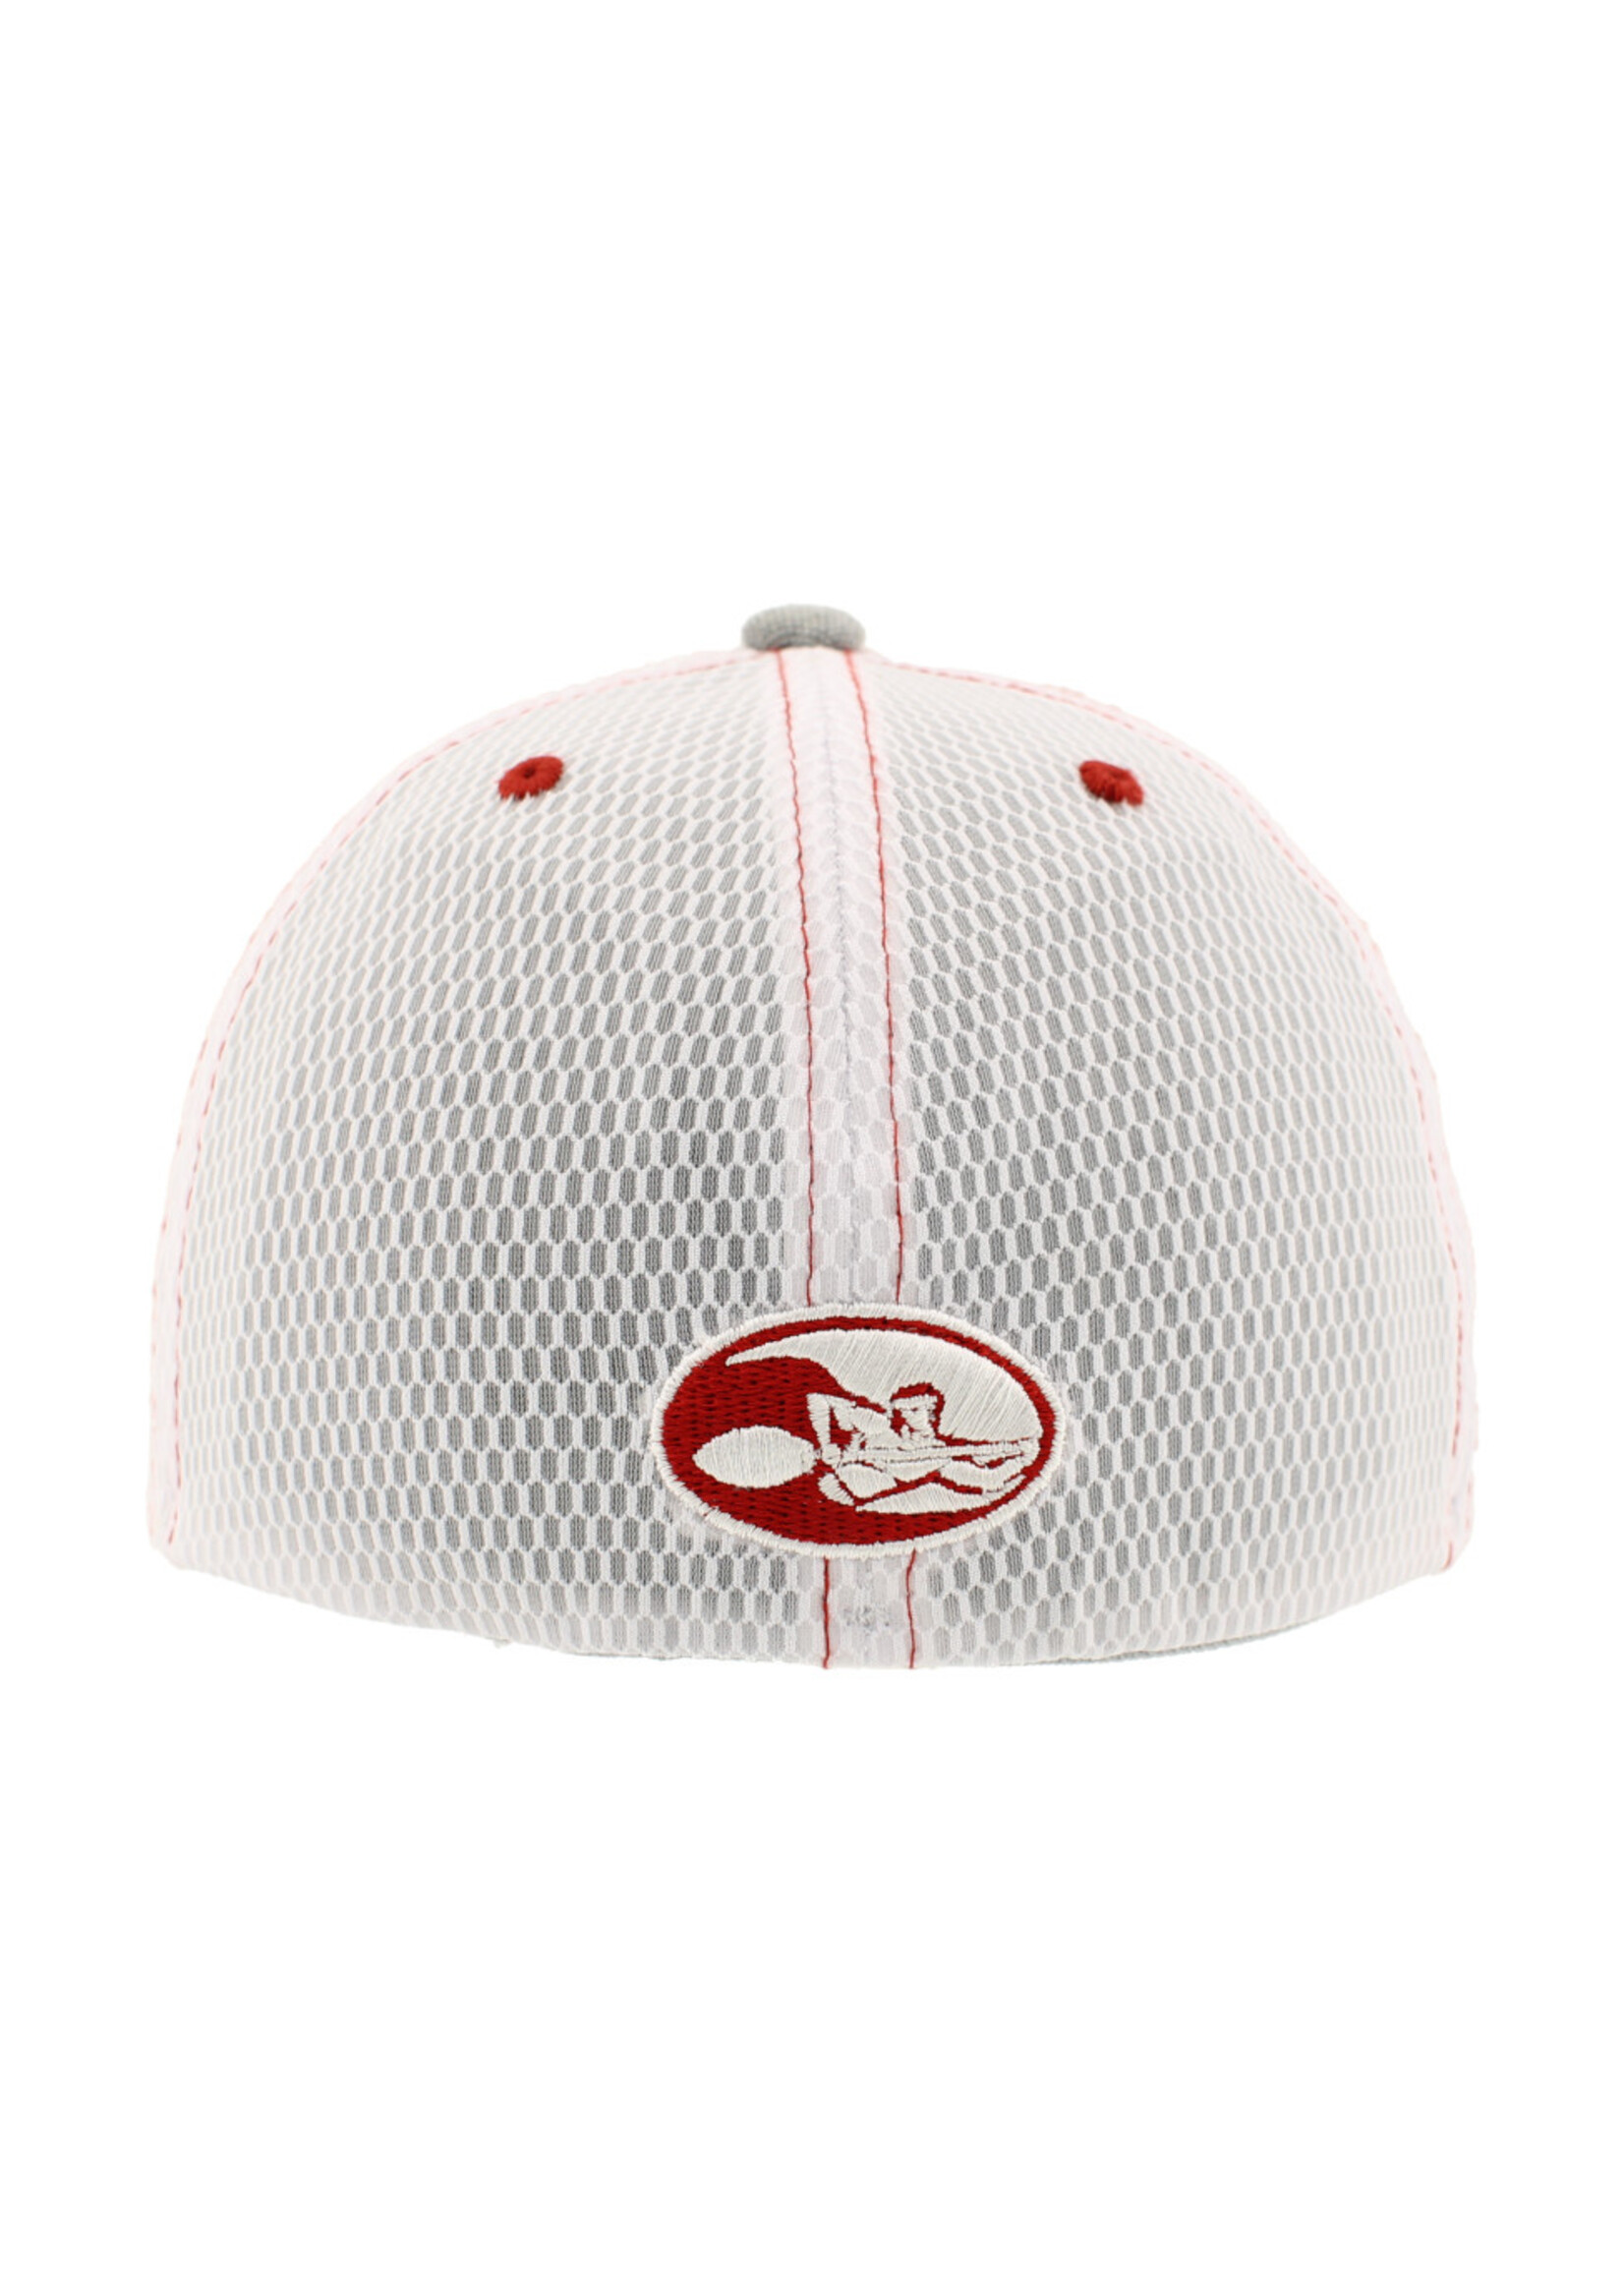 ZEPHYR Zephyr The Church College of Hawaii "Polo Knit Curve" Hat -